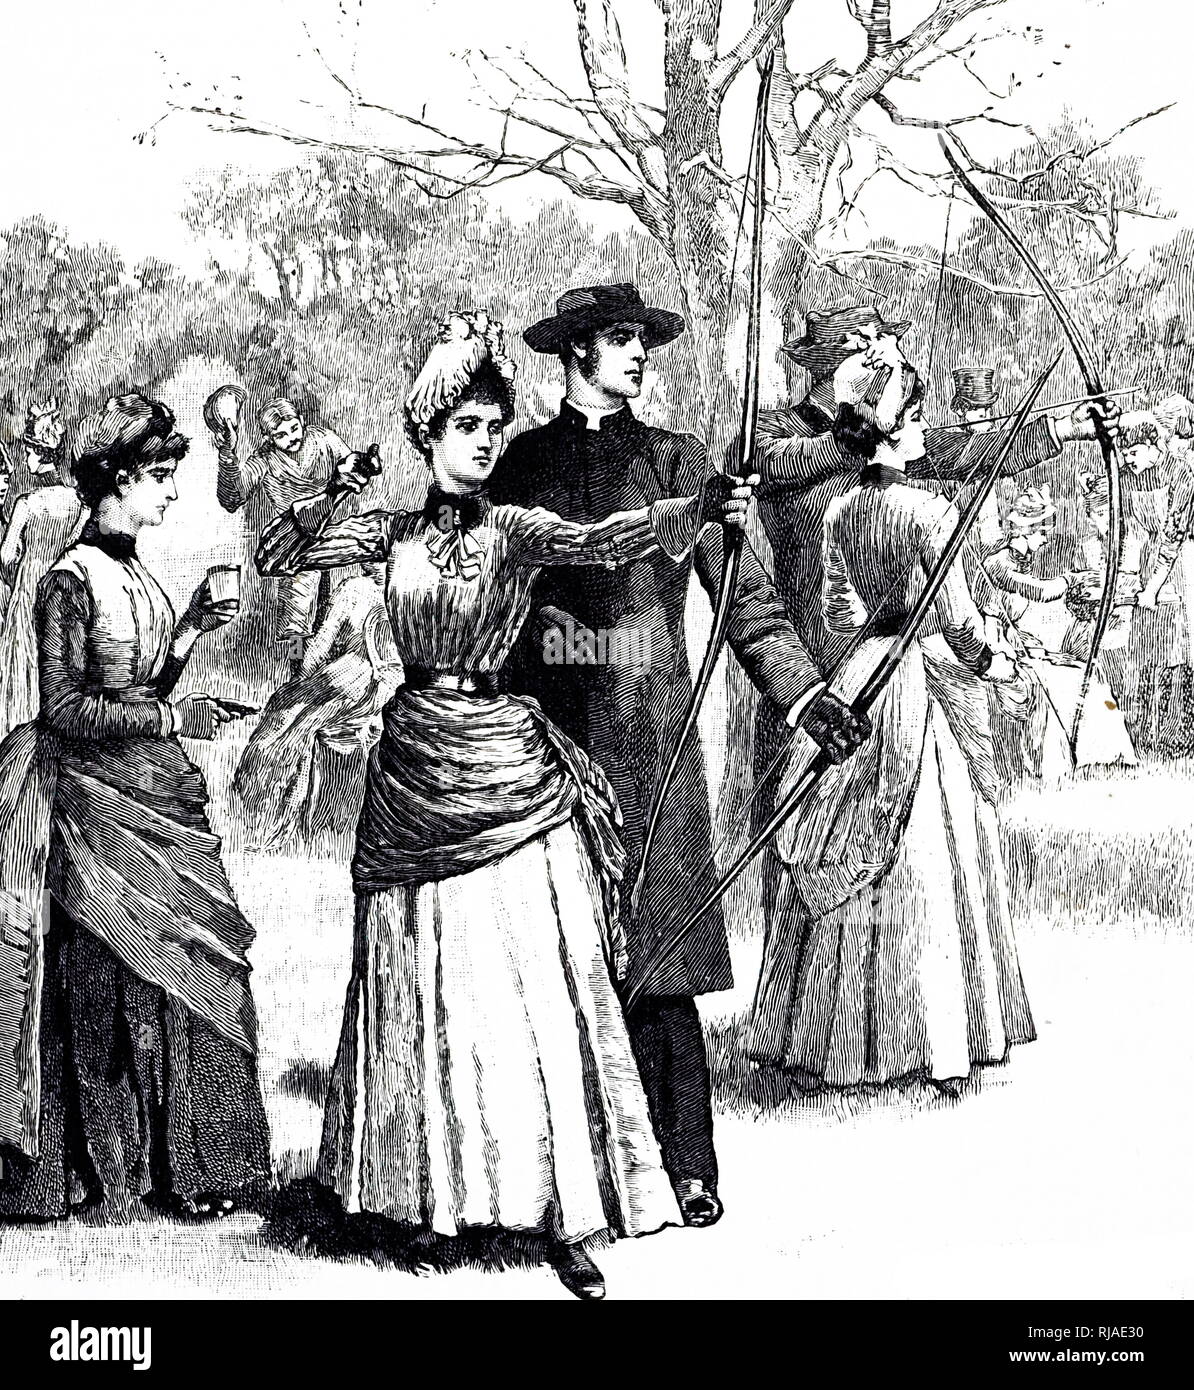 Illustration depicting a 19th-century archery contest, with women taking part Stock Photo